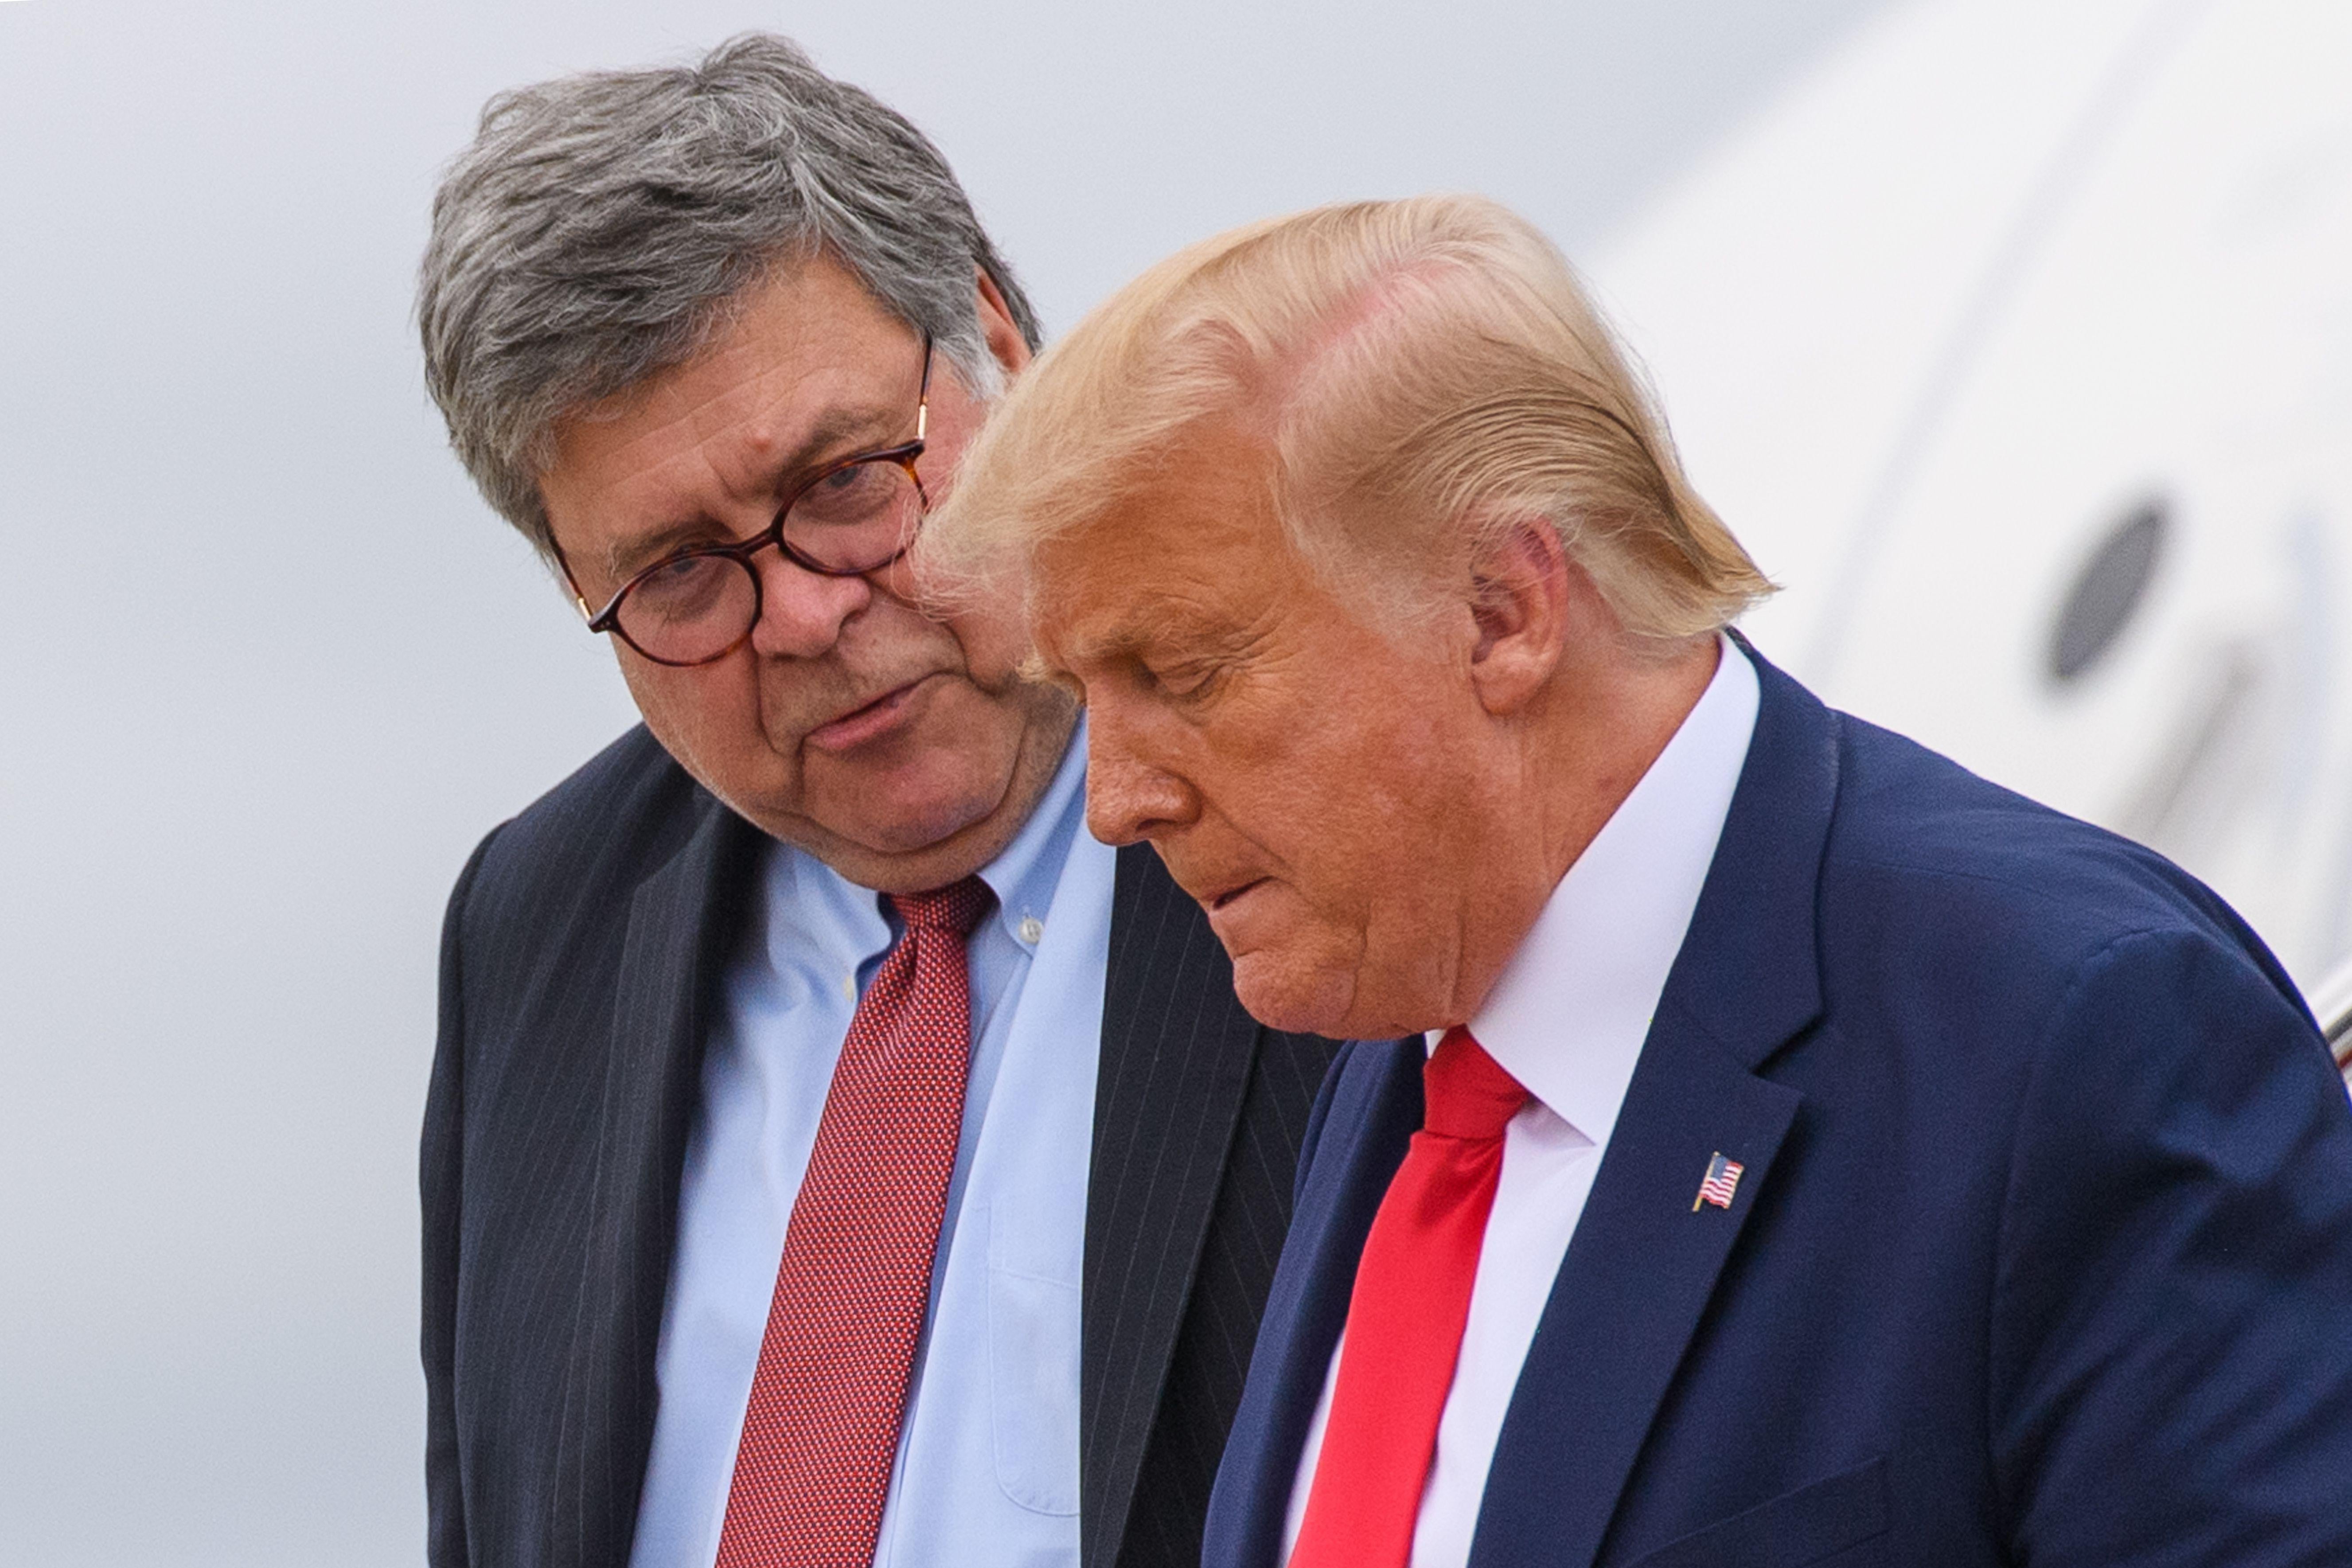 Barr speaks into Trump's ear as they walk down the steps of Air Force One.